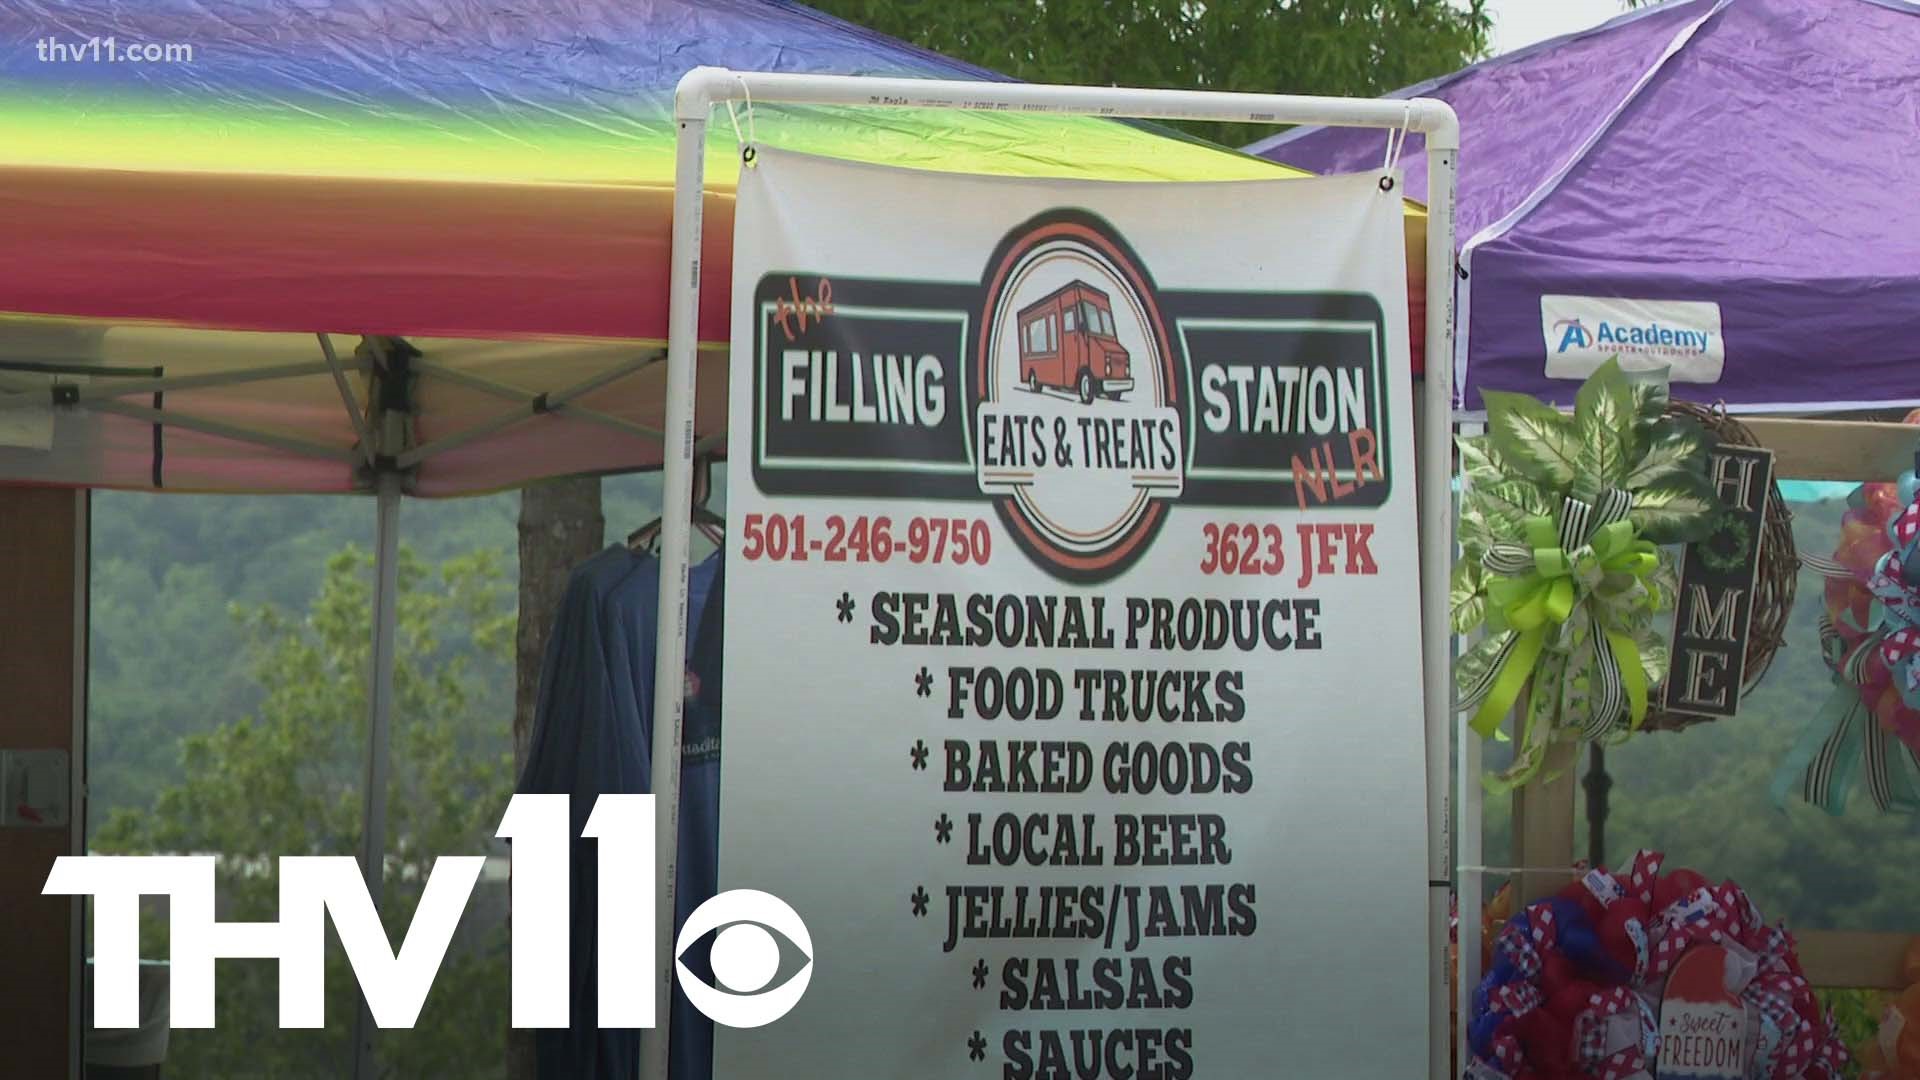 Local vendors were selling everything from jewelry to homemade sauce at North Little Rock's community-driven Rockwater Outdoor Market this weekend.